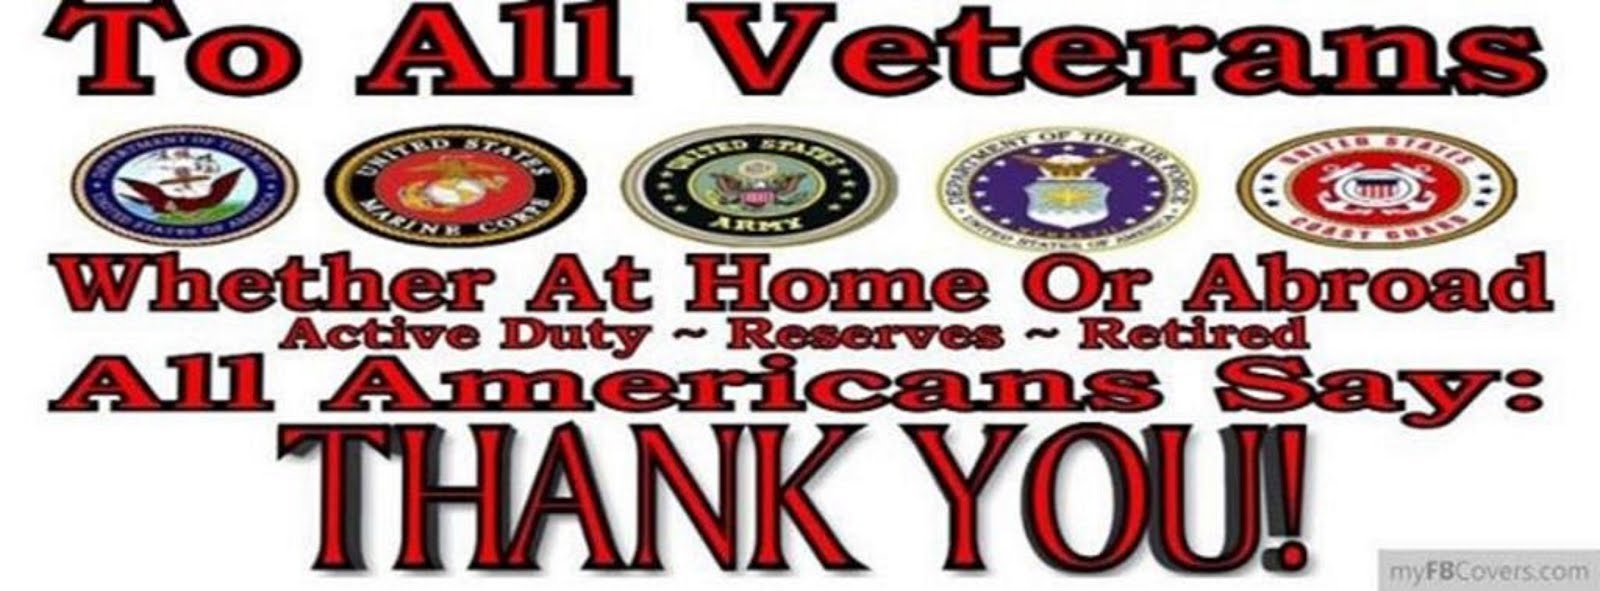 THANK YOU TO ALL VETERANS